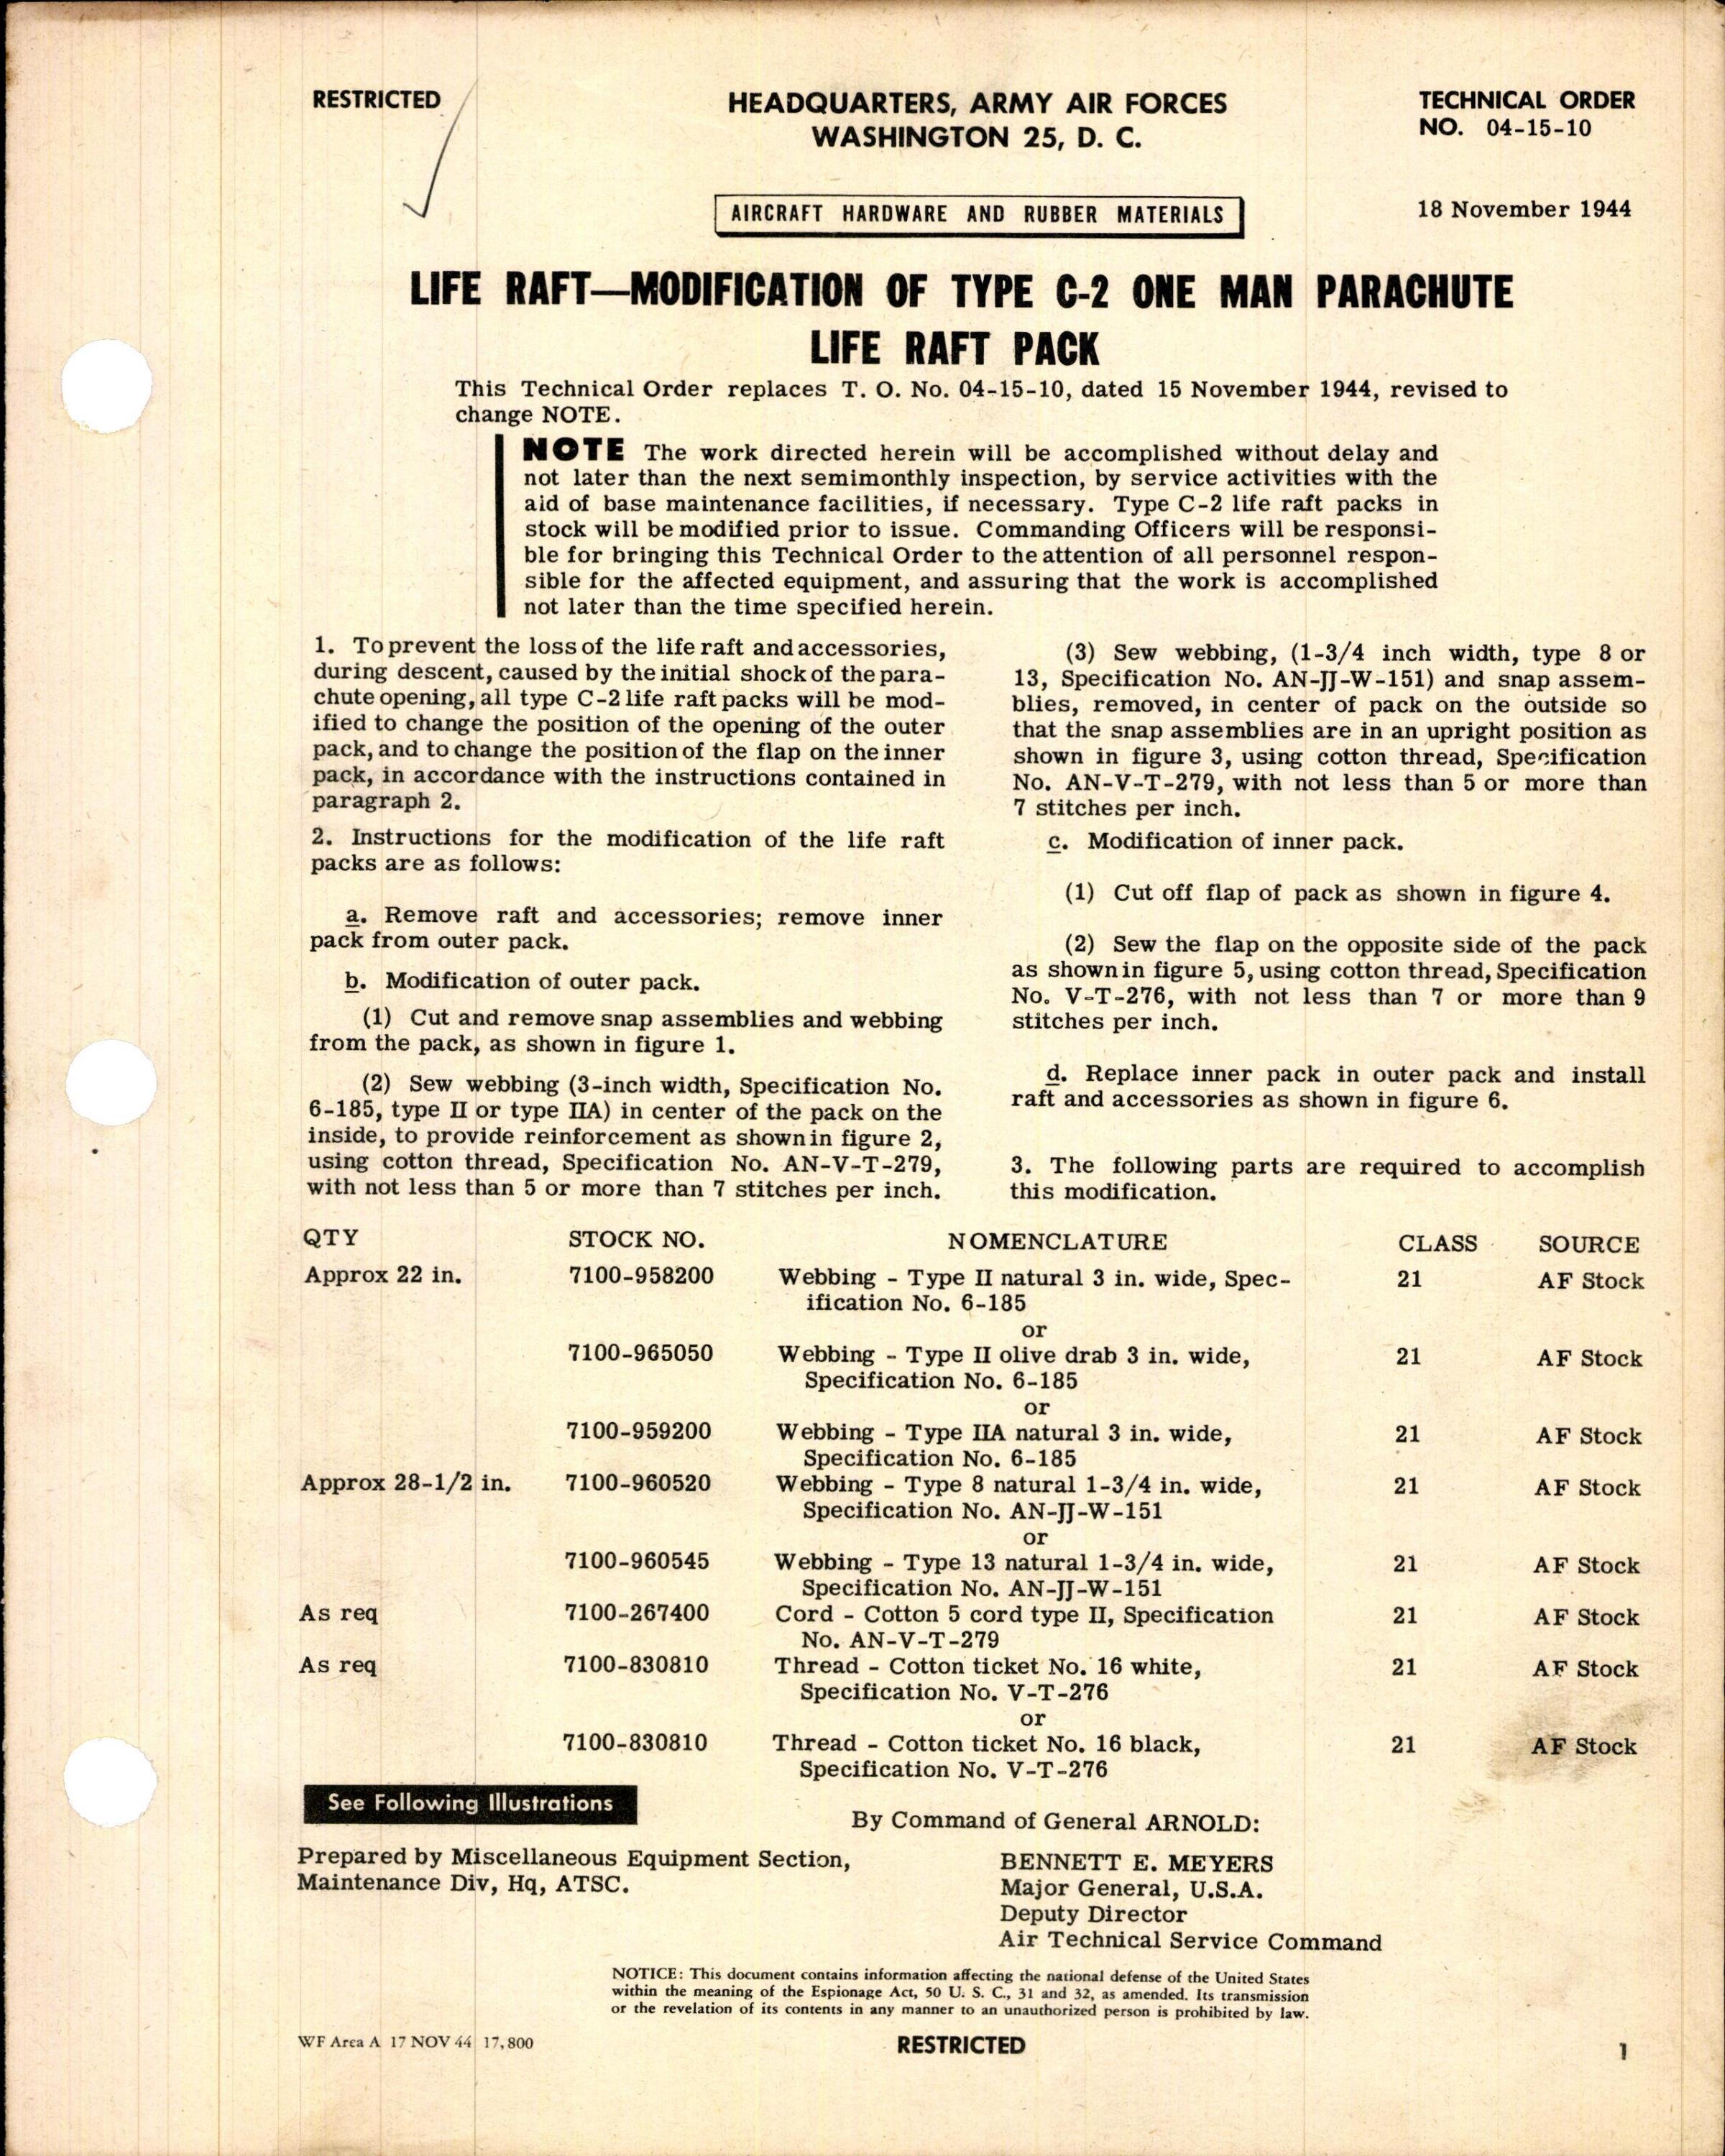 Sample page 1 from AirCorps Library document: Modification of Type C-2 One Man Parachute Life Raft Pack